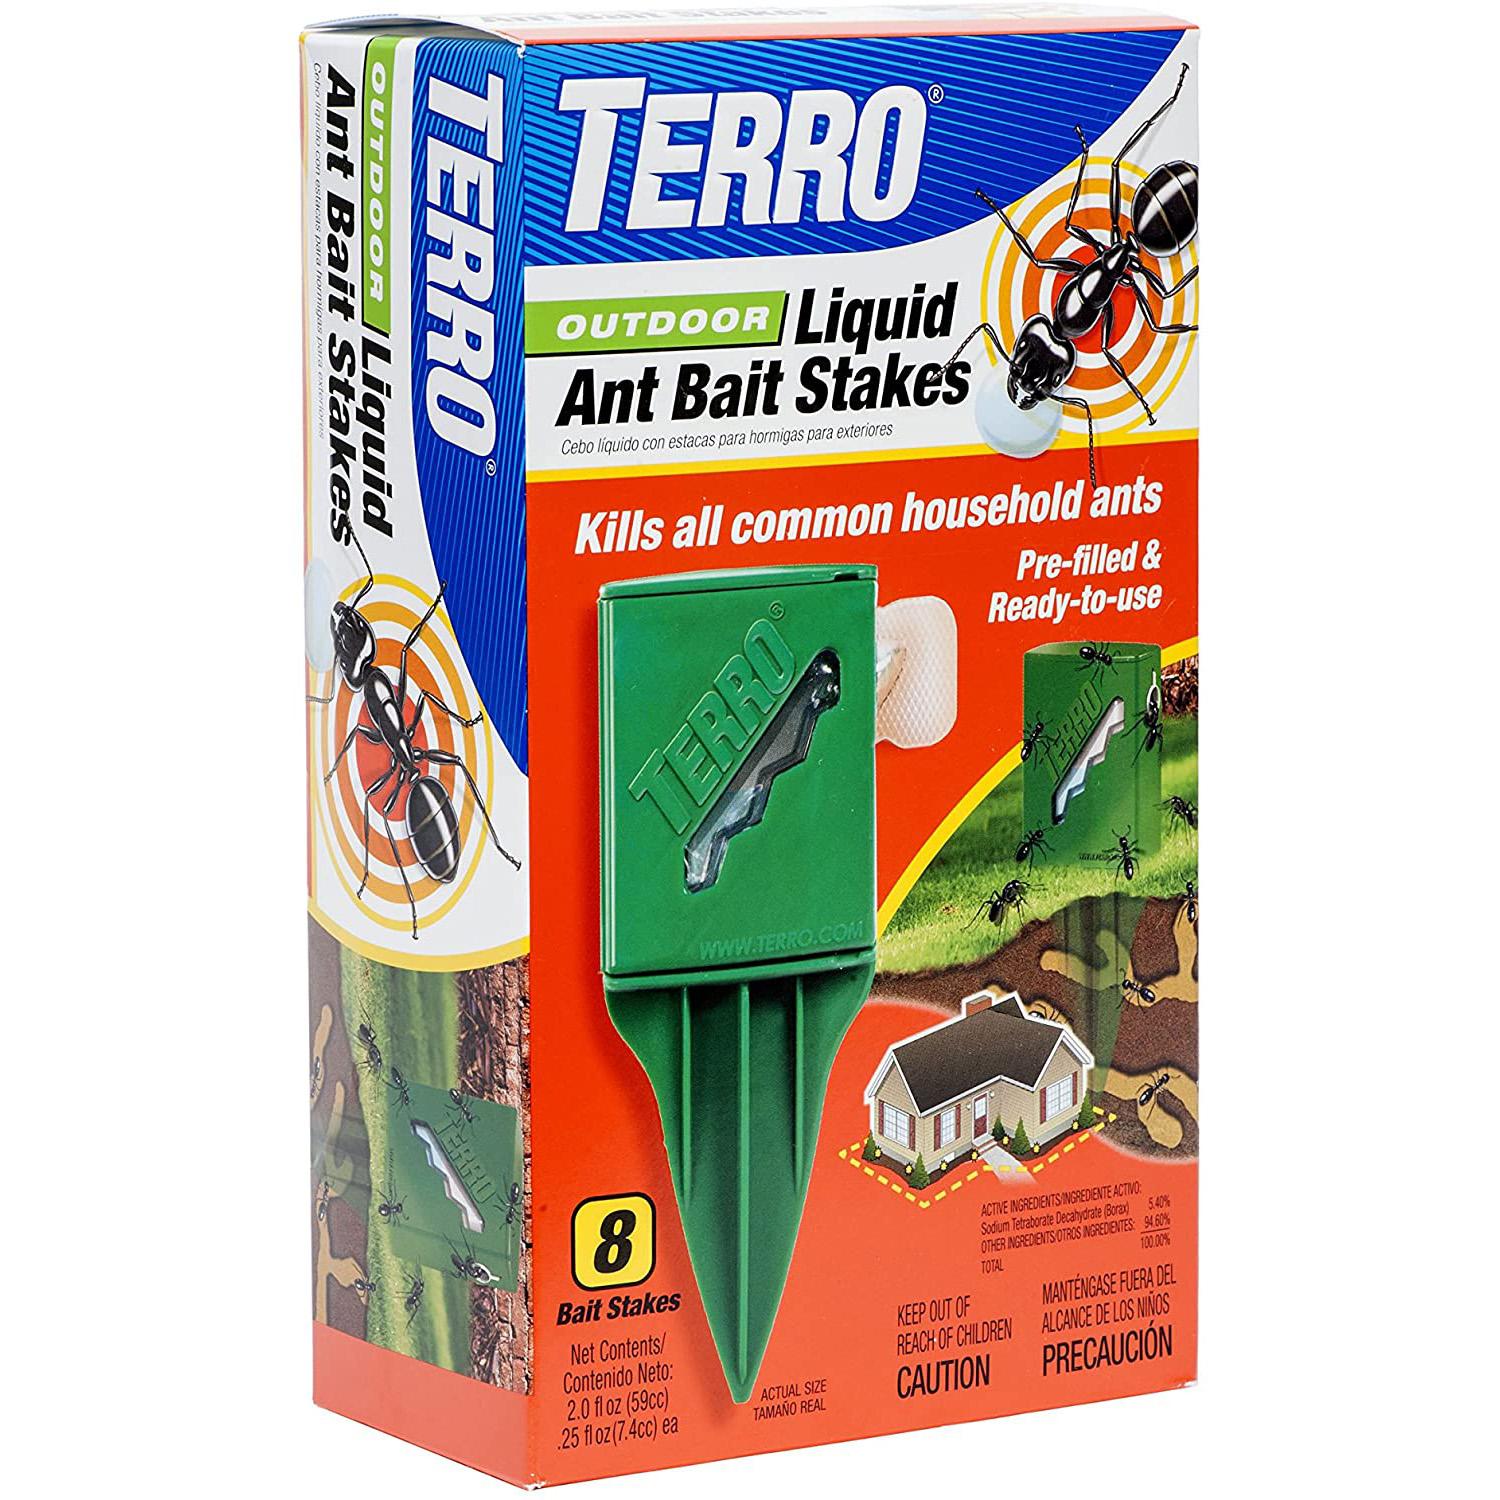 TERRO Outdoor Liquid Ant Bait Stakes for $4.99 Shipped